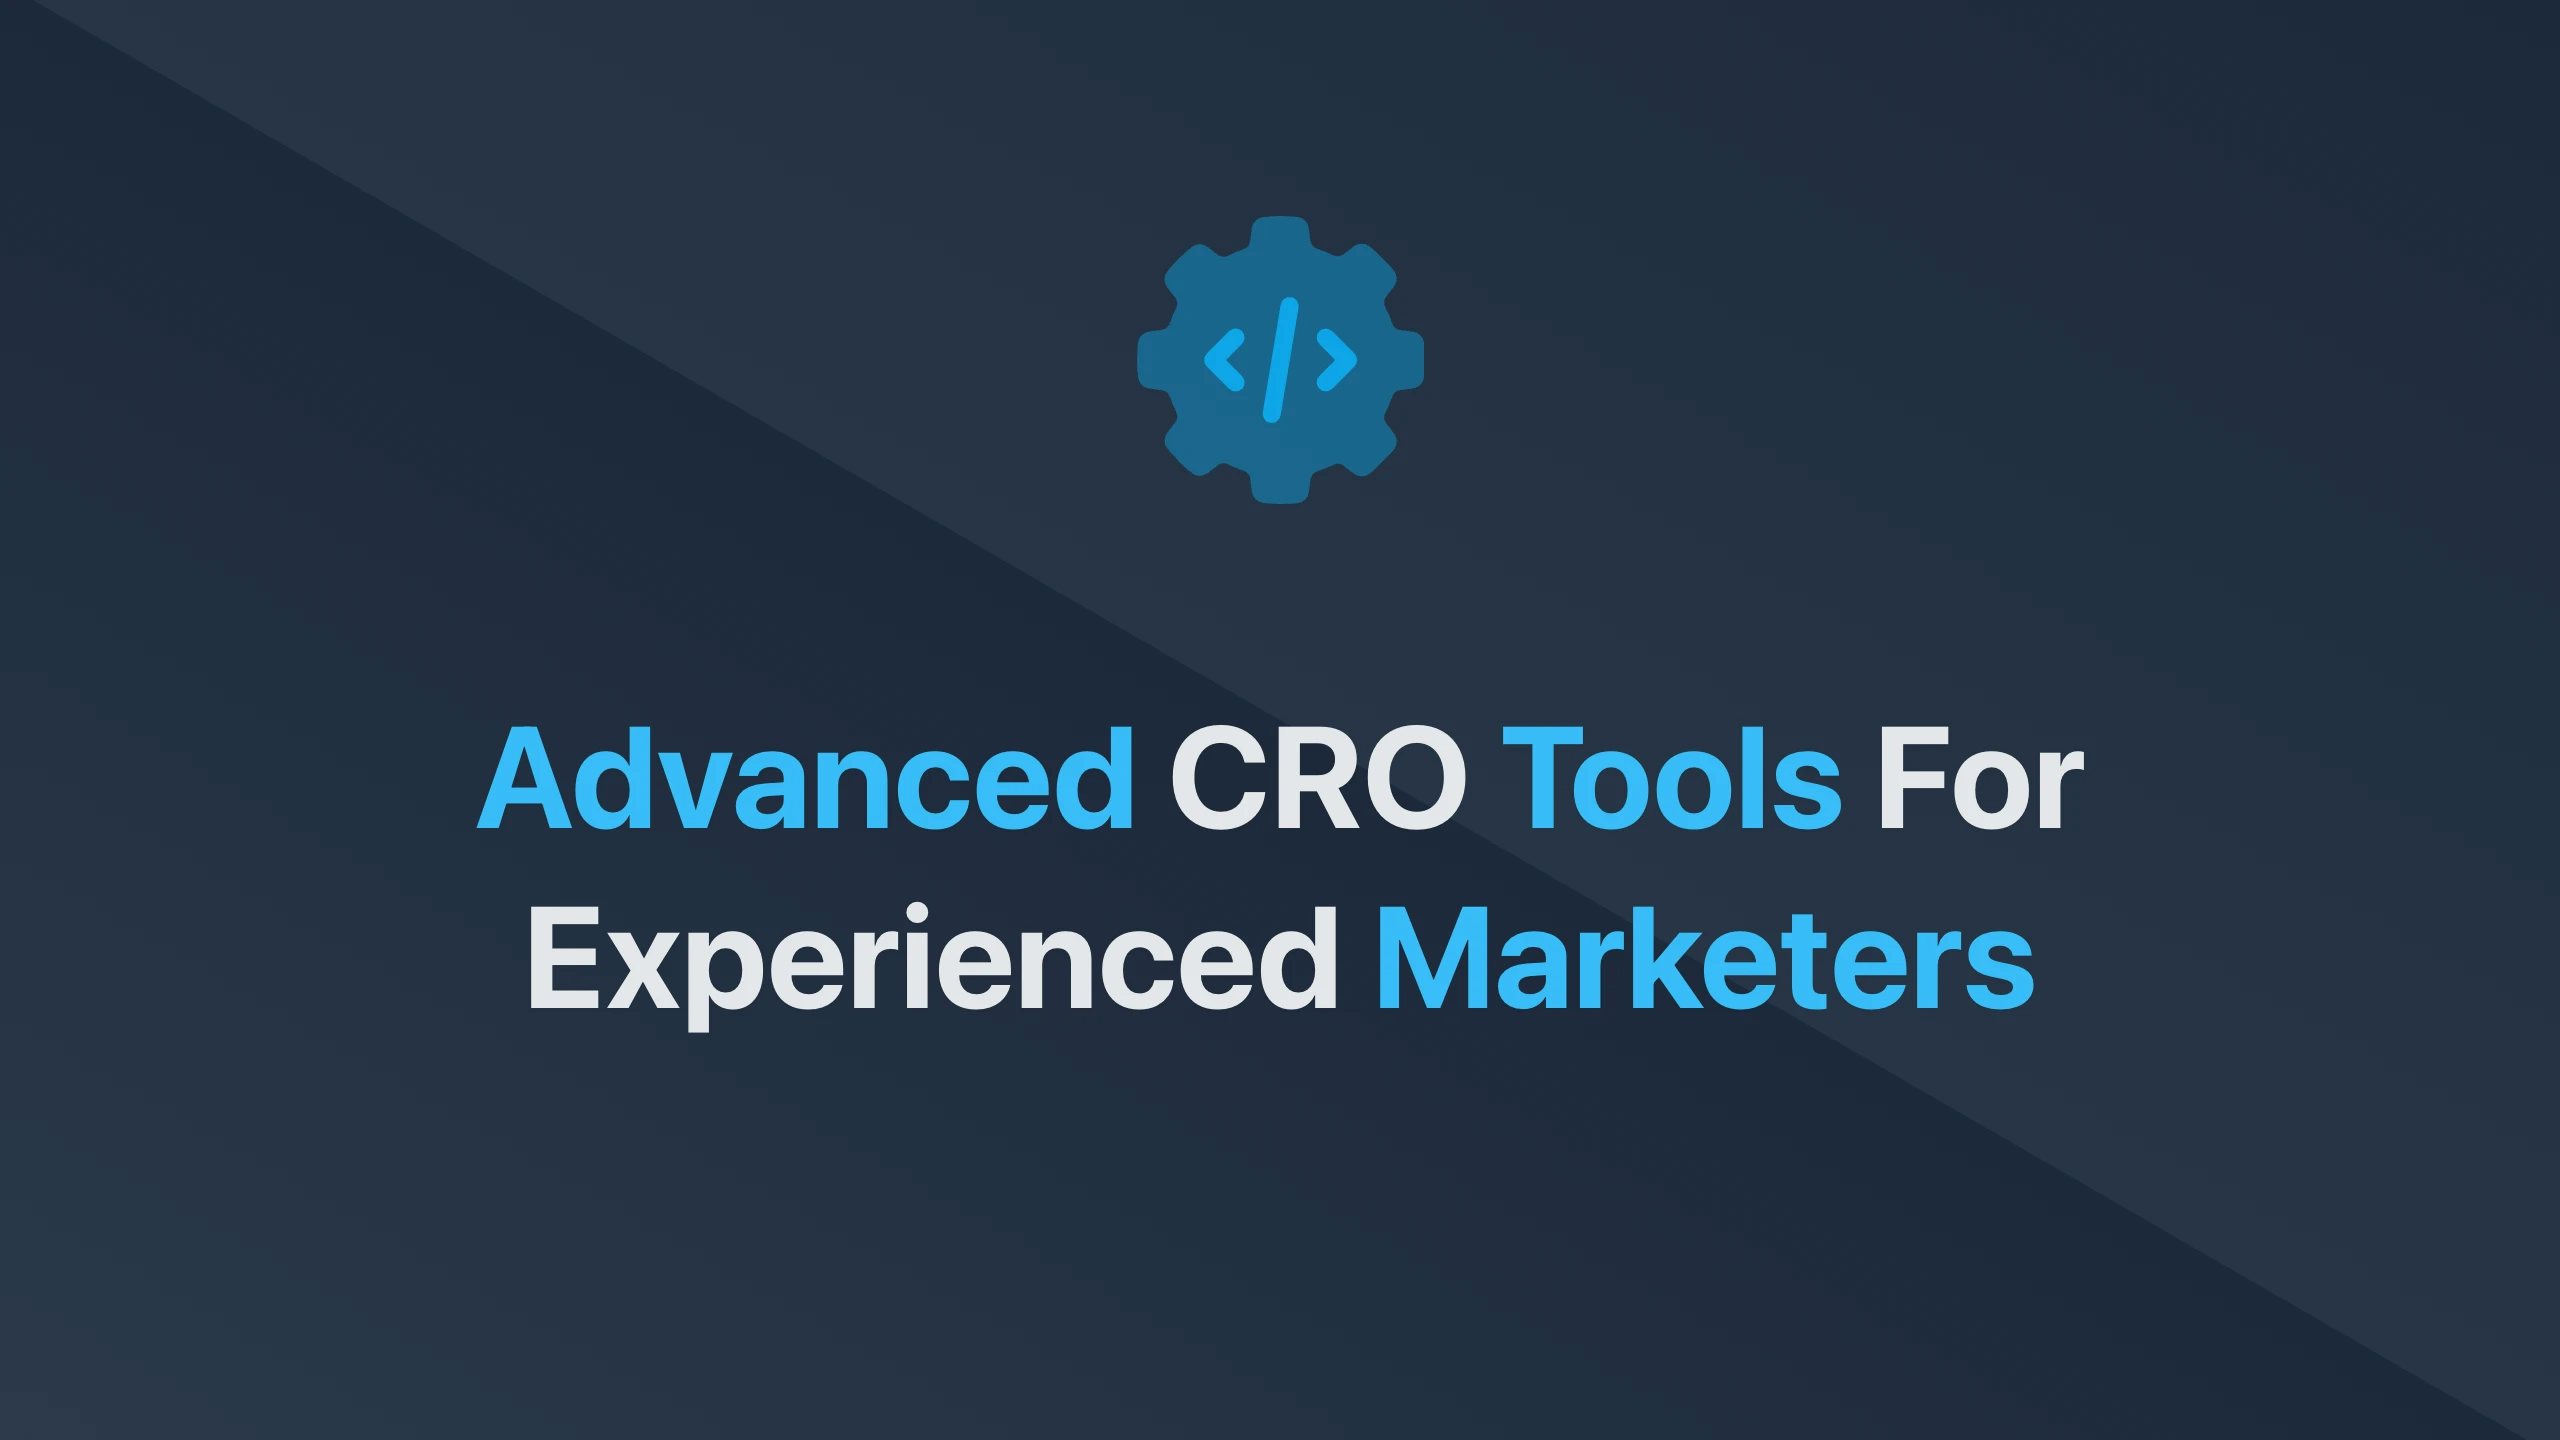 Cover Image for Advanced CRO Tools for Experienced Marketers